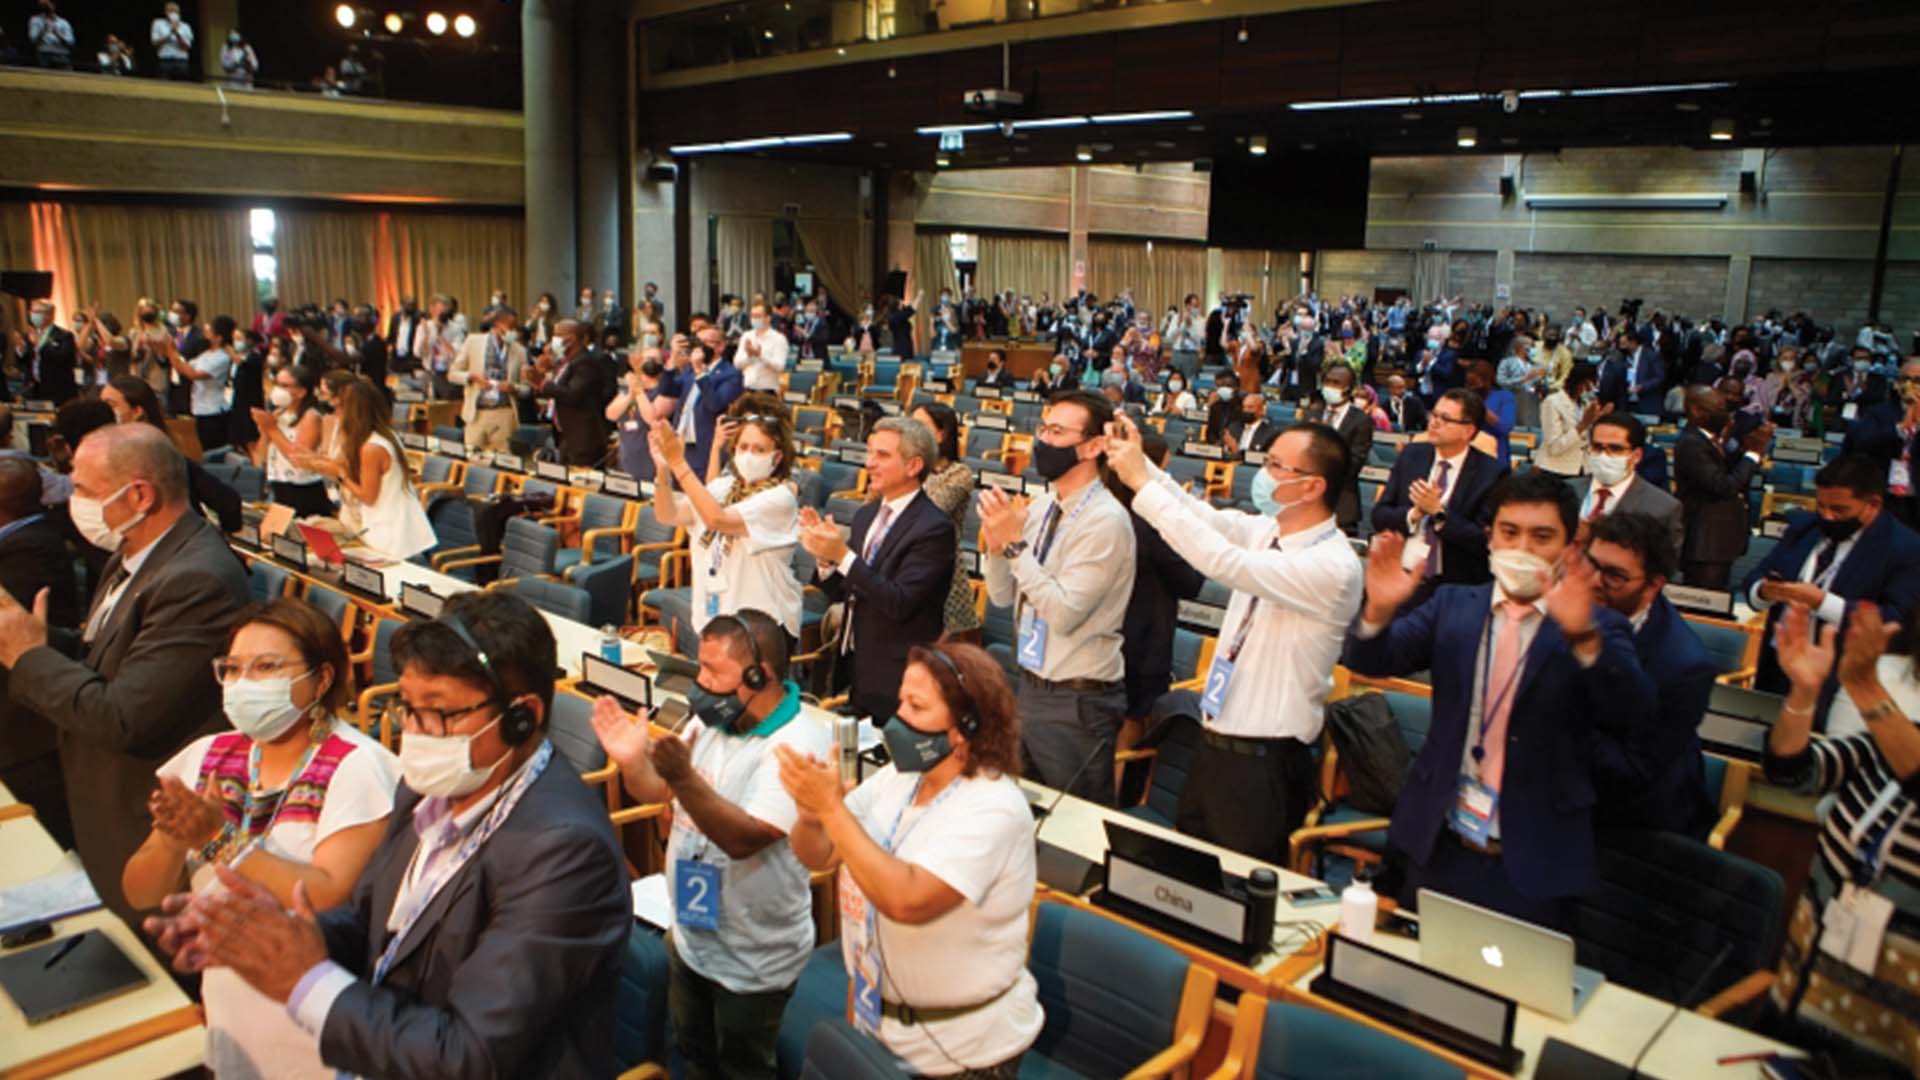 UN delegates give standing ovation after resolution passes